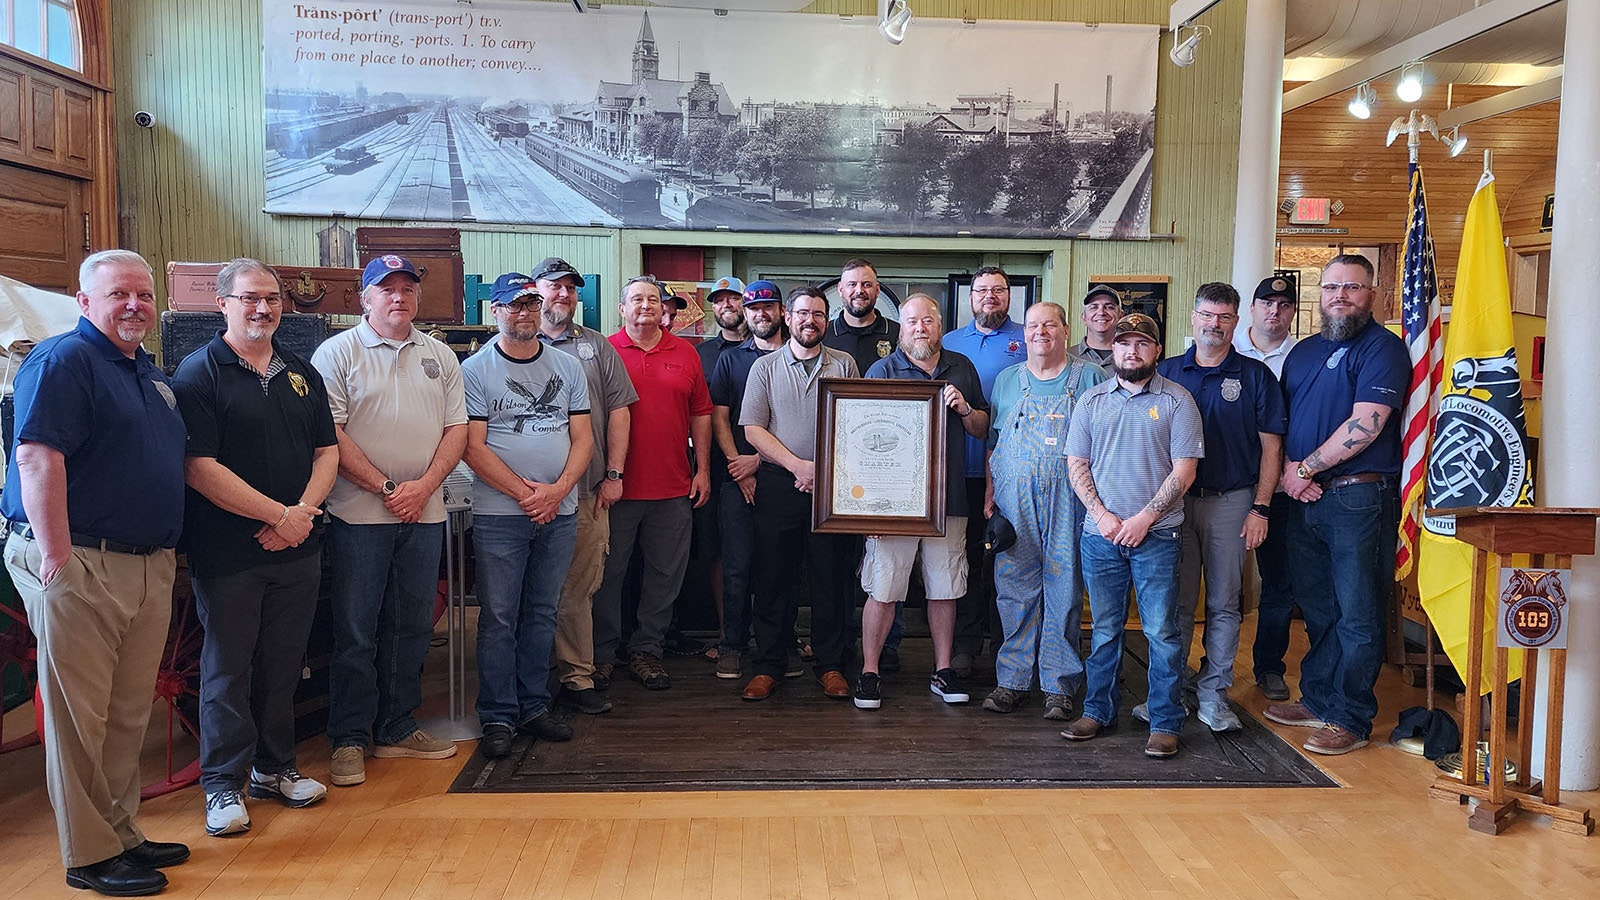 Members of the Brotherhood of Locomotive Engineers and Trainmen Division 103 celebrate 155 years as a union chapter and recently turned their original charter over to the Wyoming State Archives.